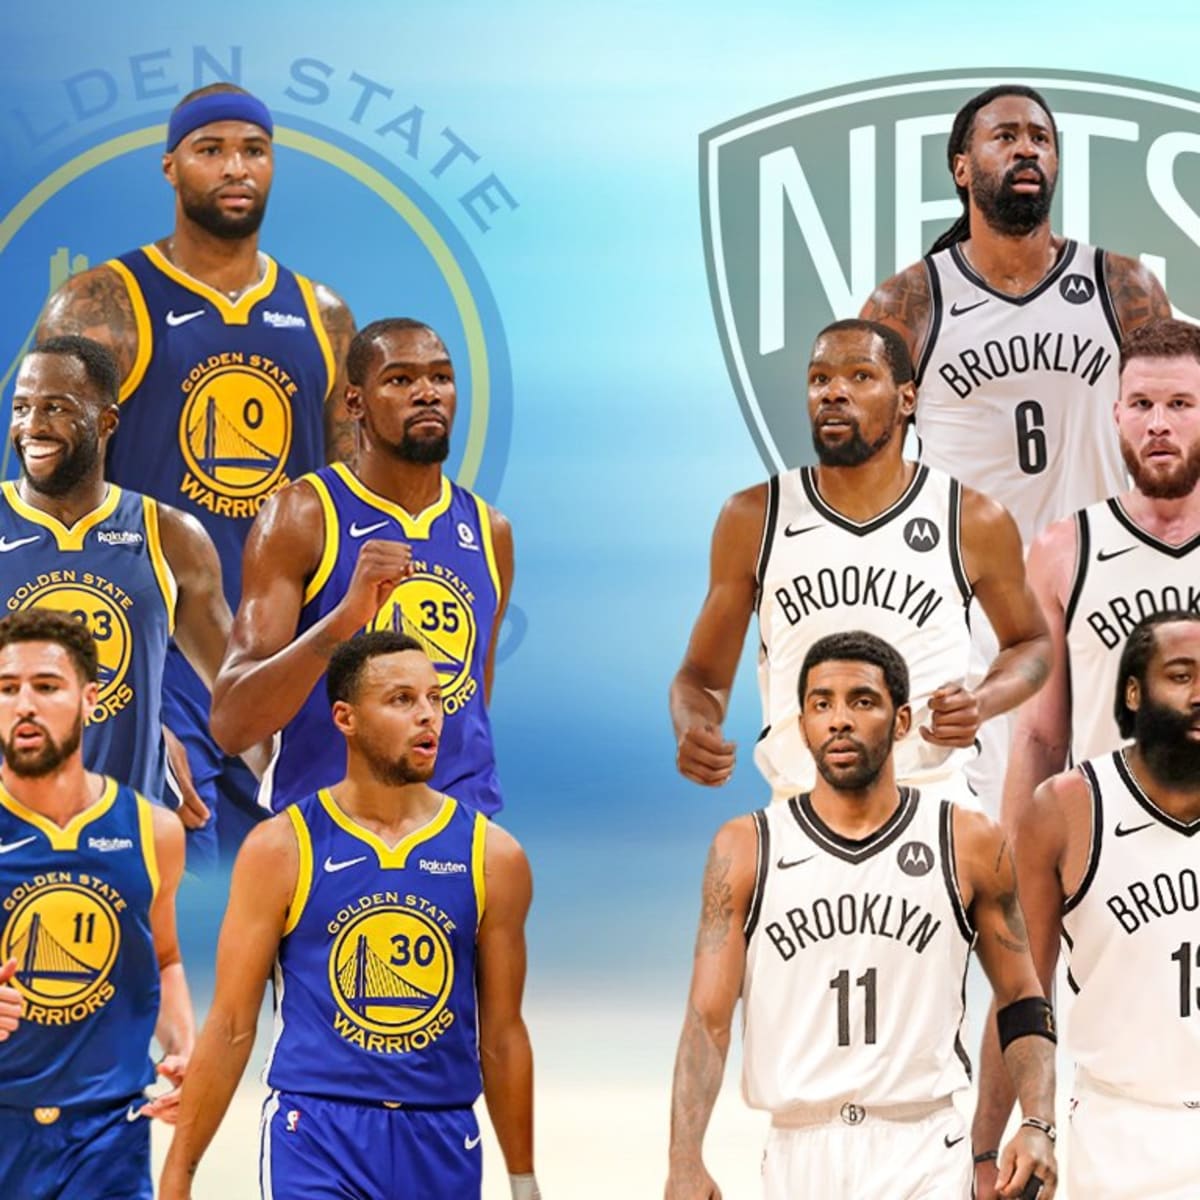 The Ultimate Matchup Prime 2019 Golden State Warriors vs